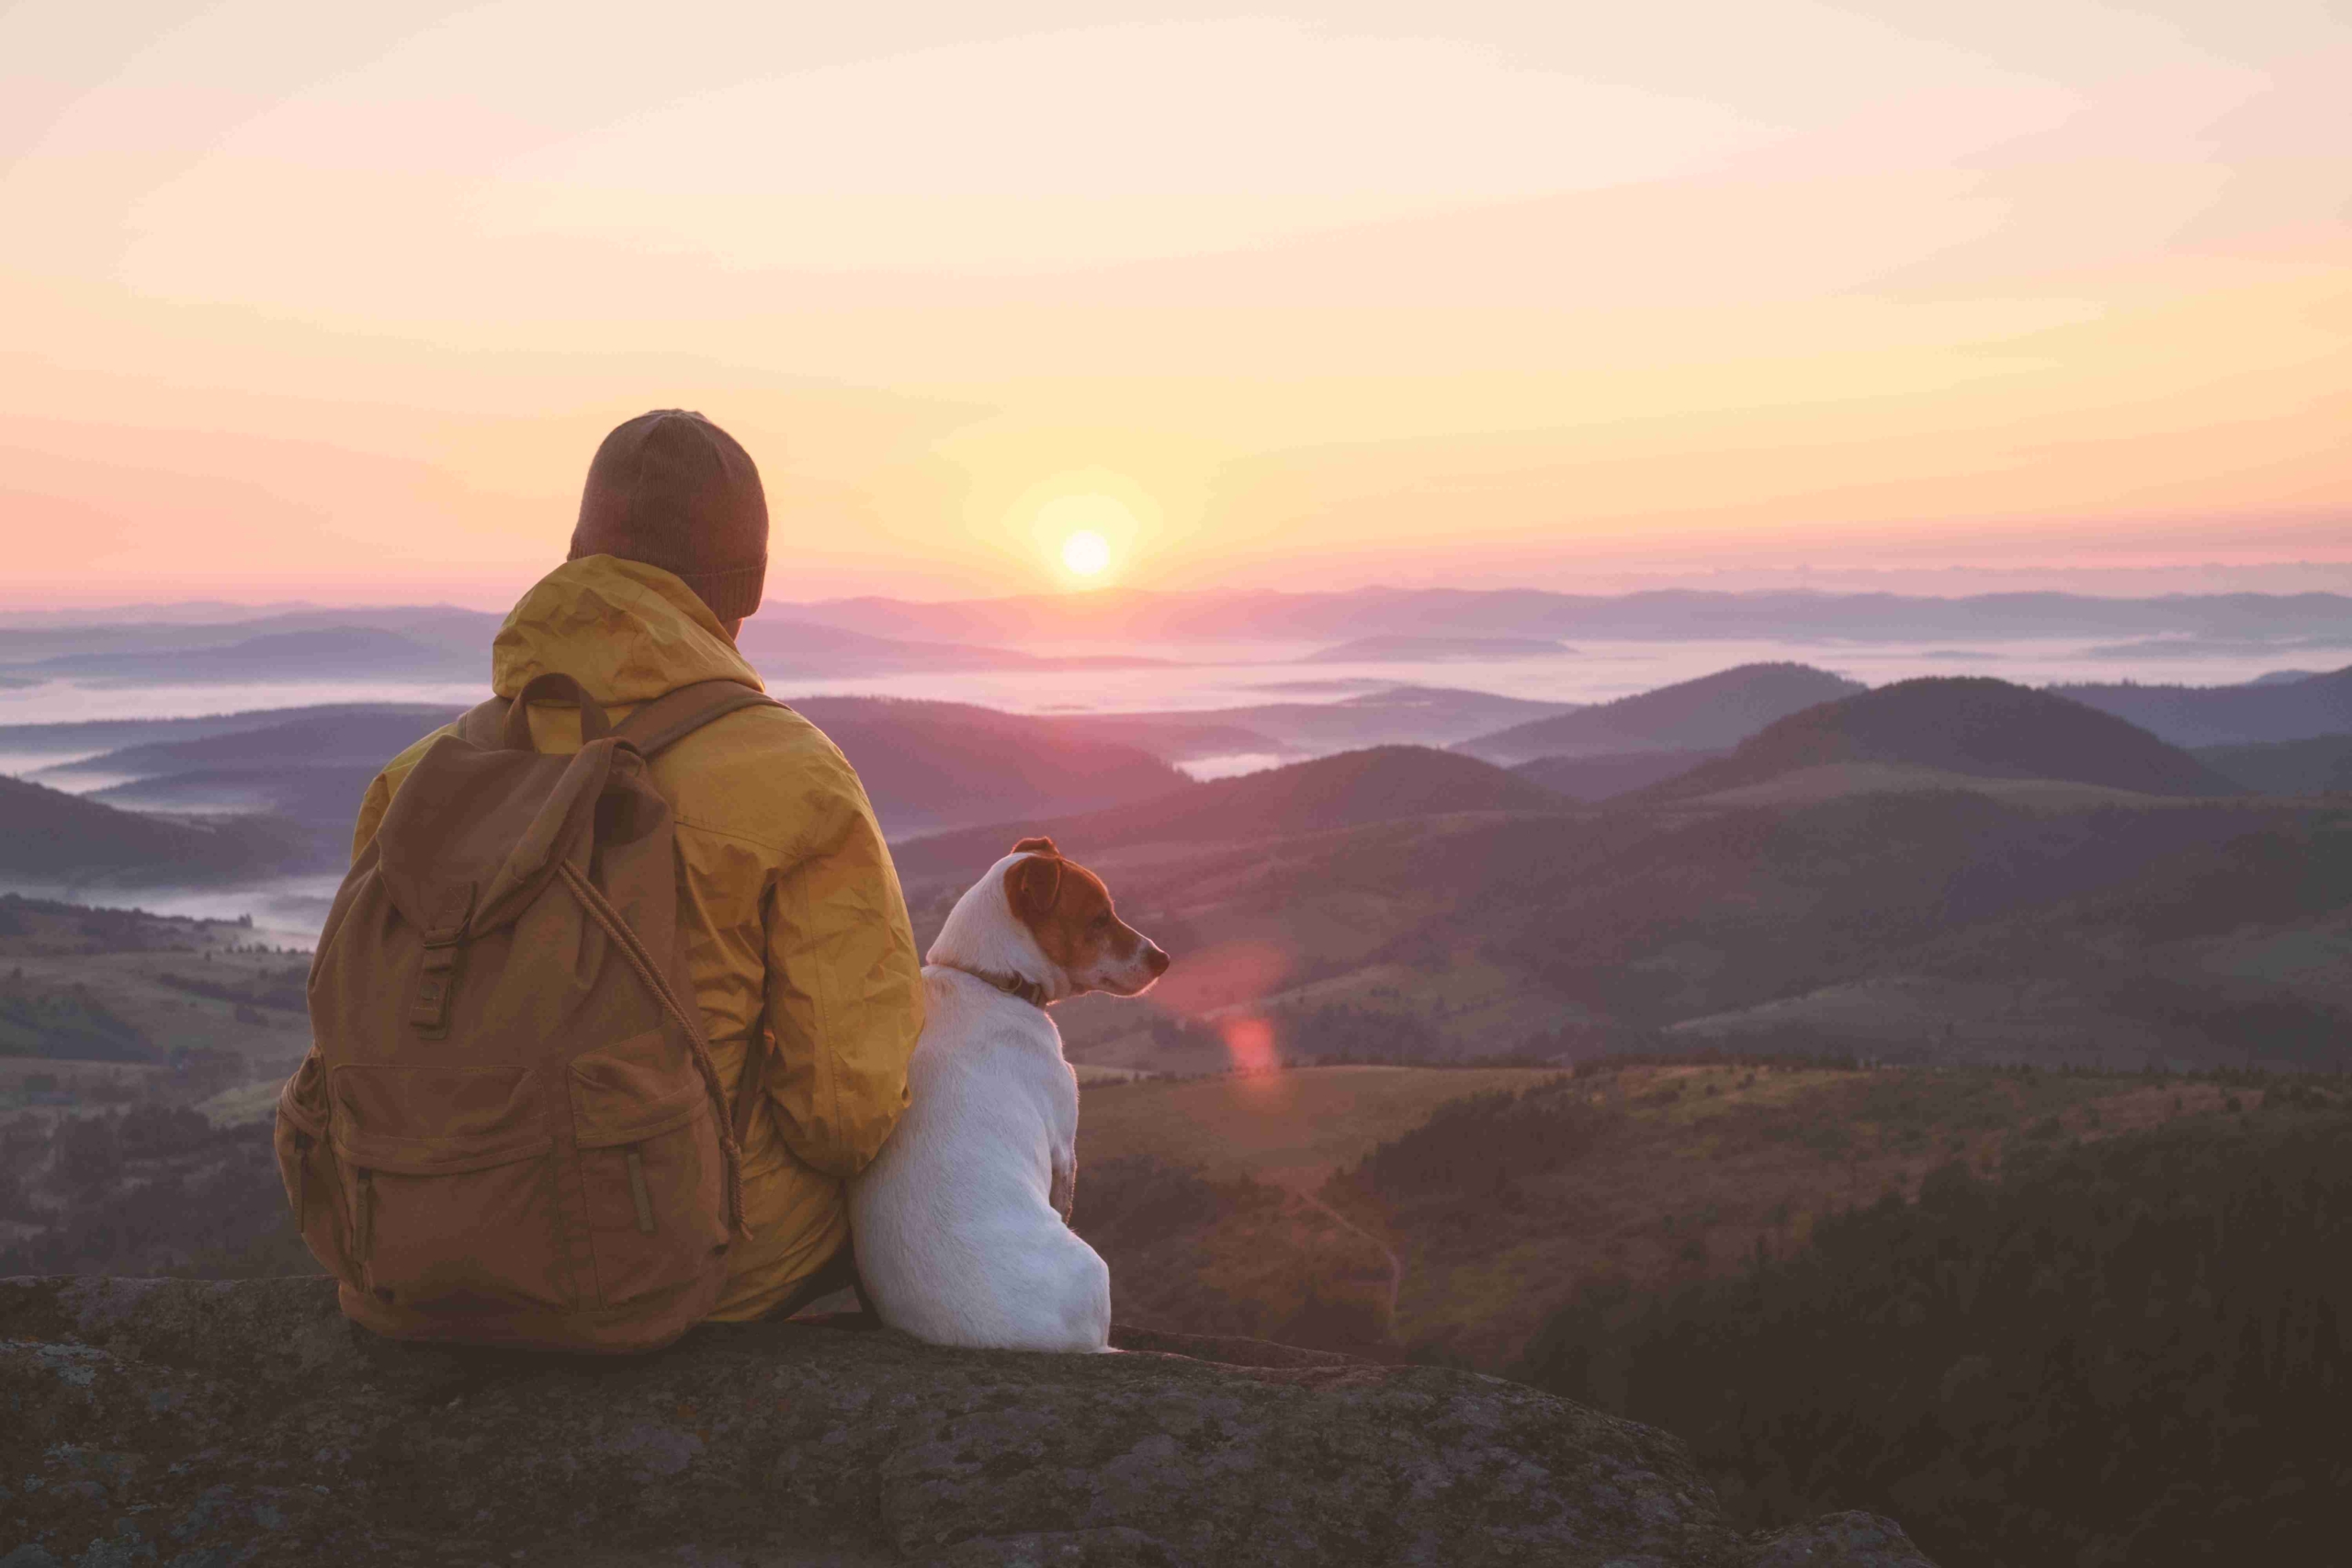 A man and his dog sitting on a rock overlooking mountains